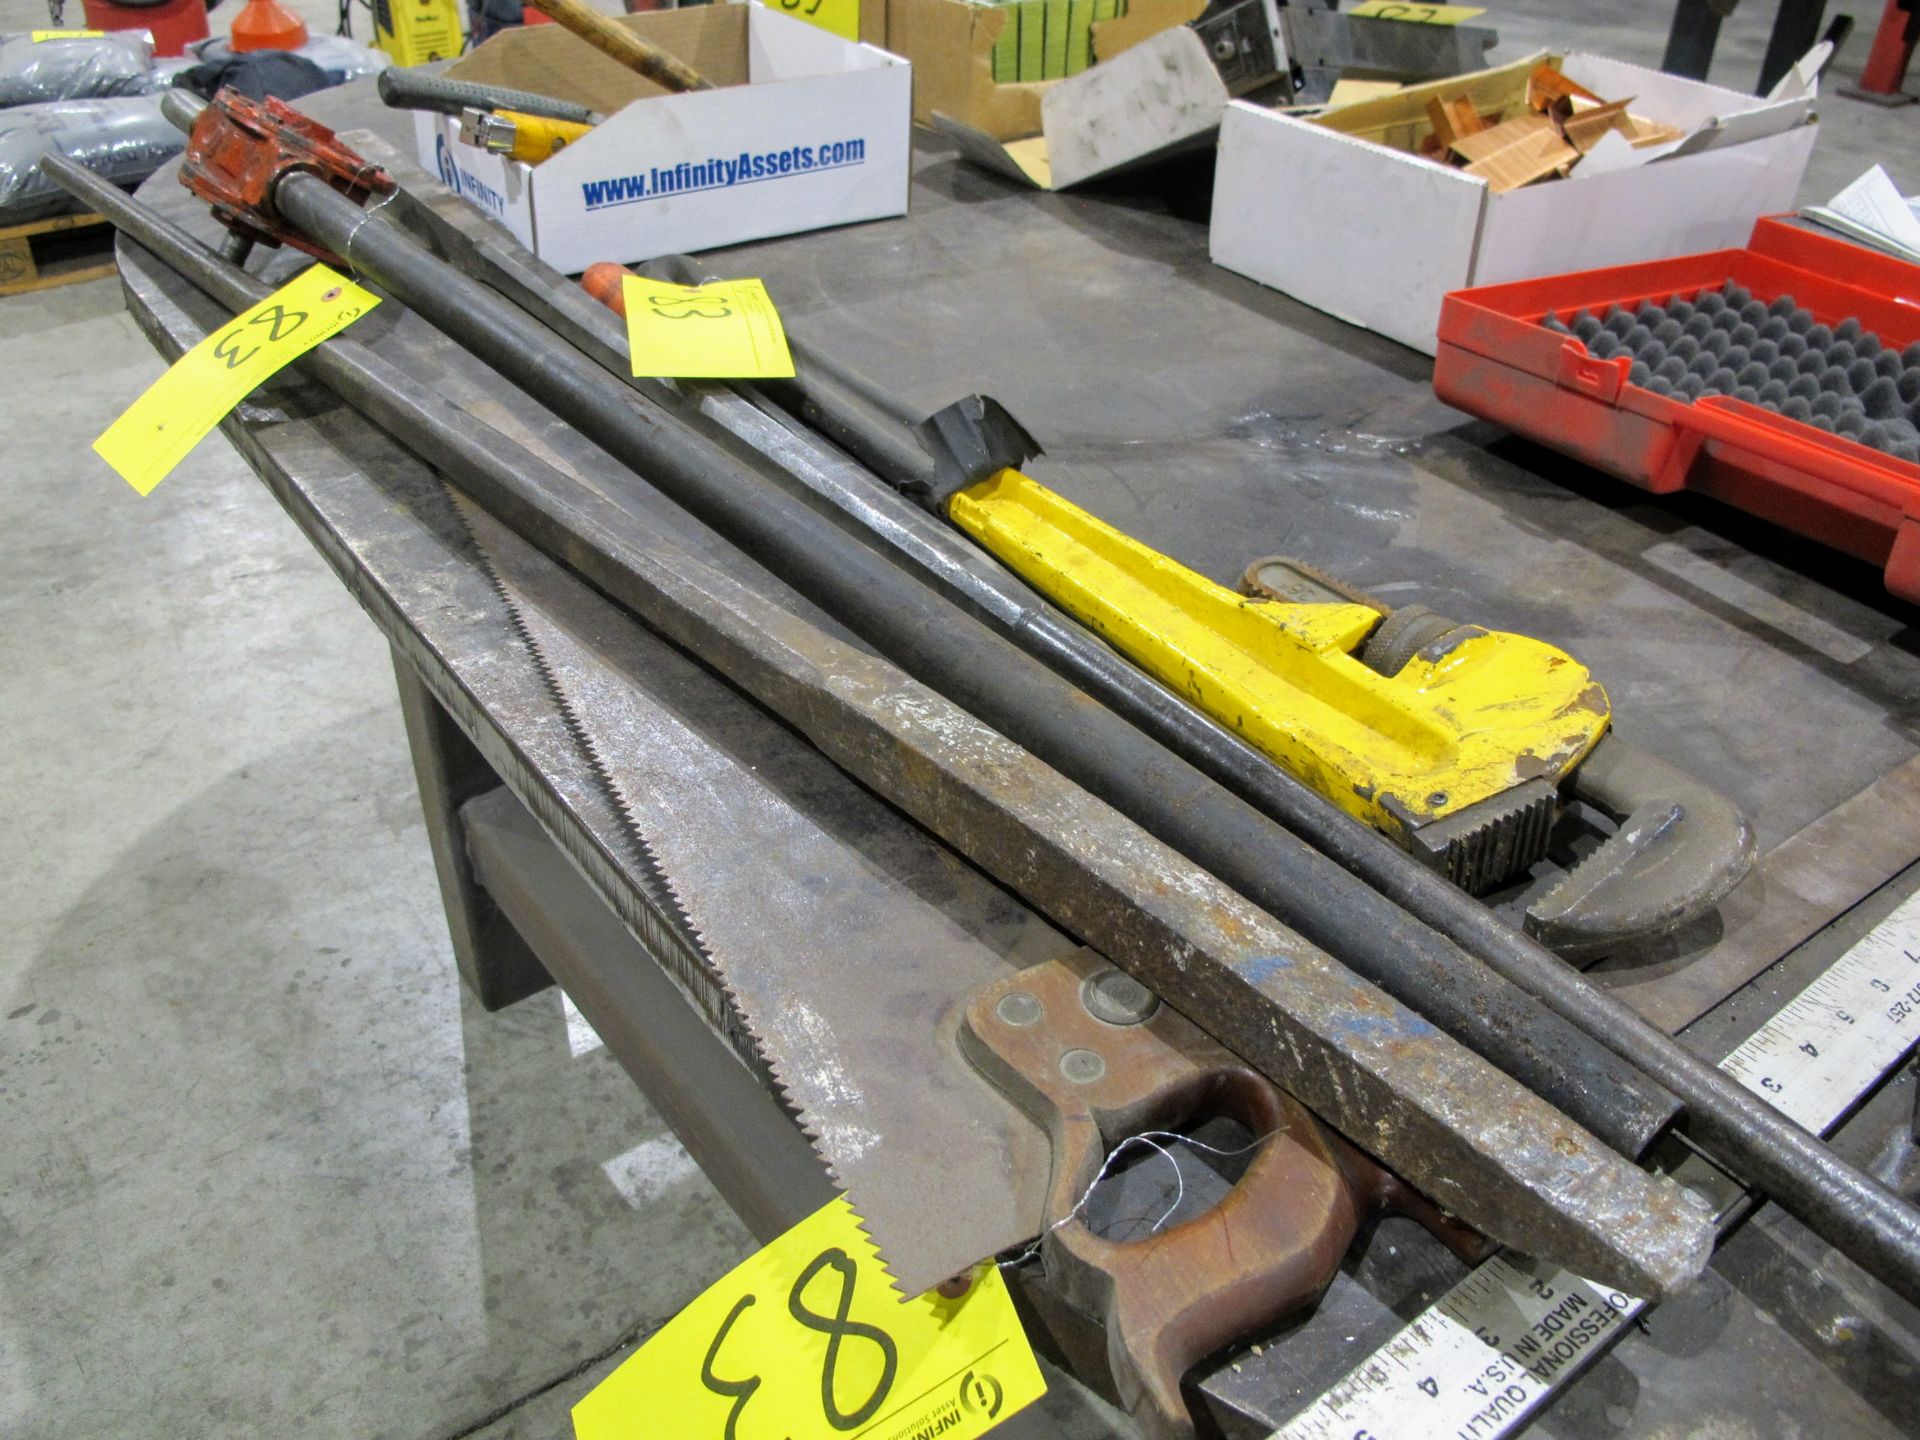 36" PIPE WRENCH, BARELL PUMP, SAW, SQUARE, HAMMERS